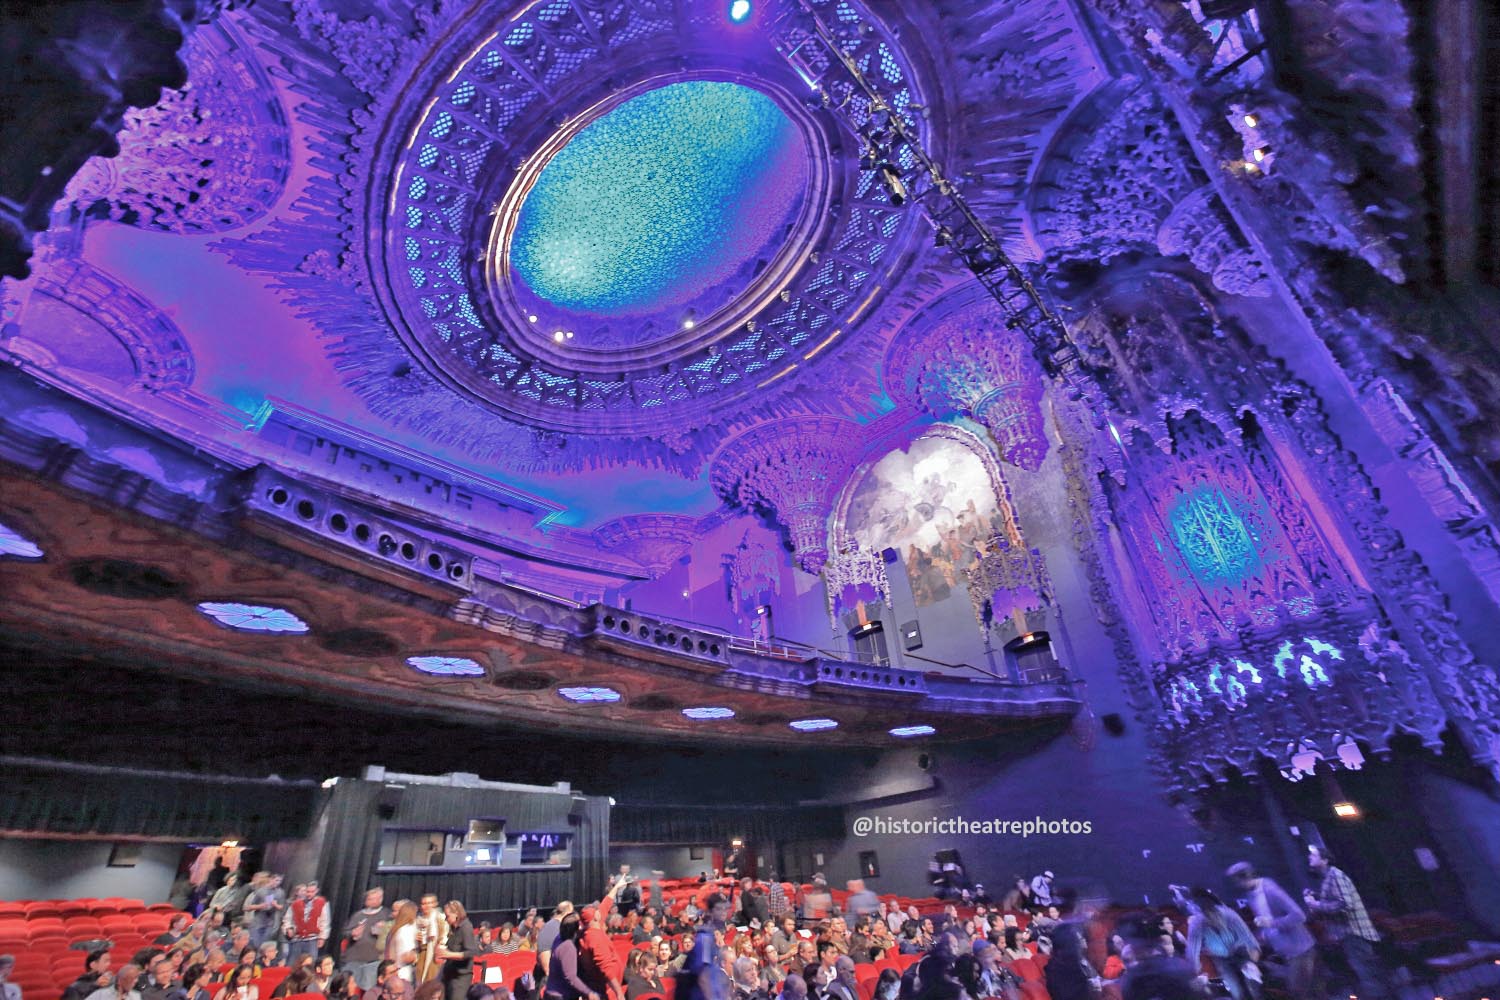 The United Theater on Broadway, Los Angeles: <i>Night On Broadway</i> 2015 from Orchestra